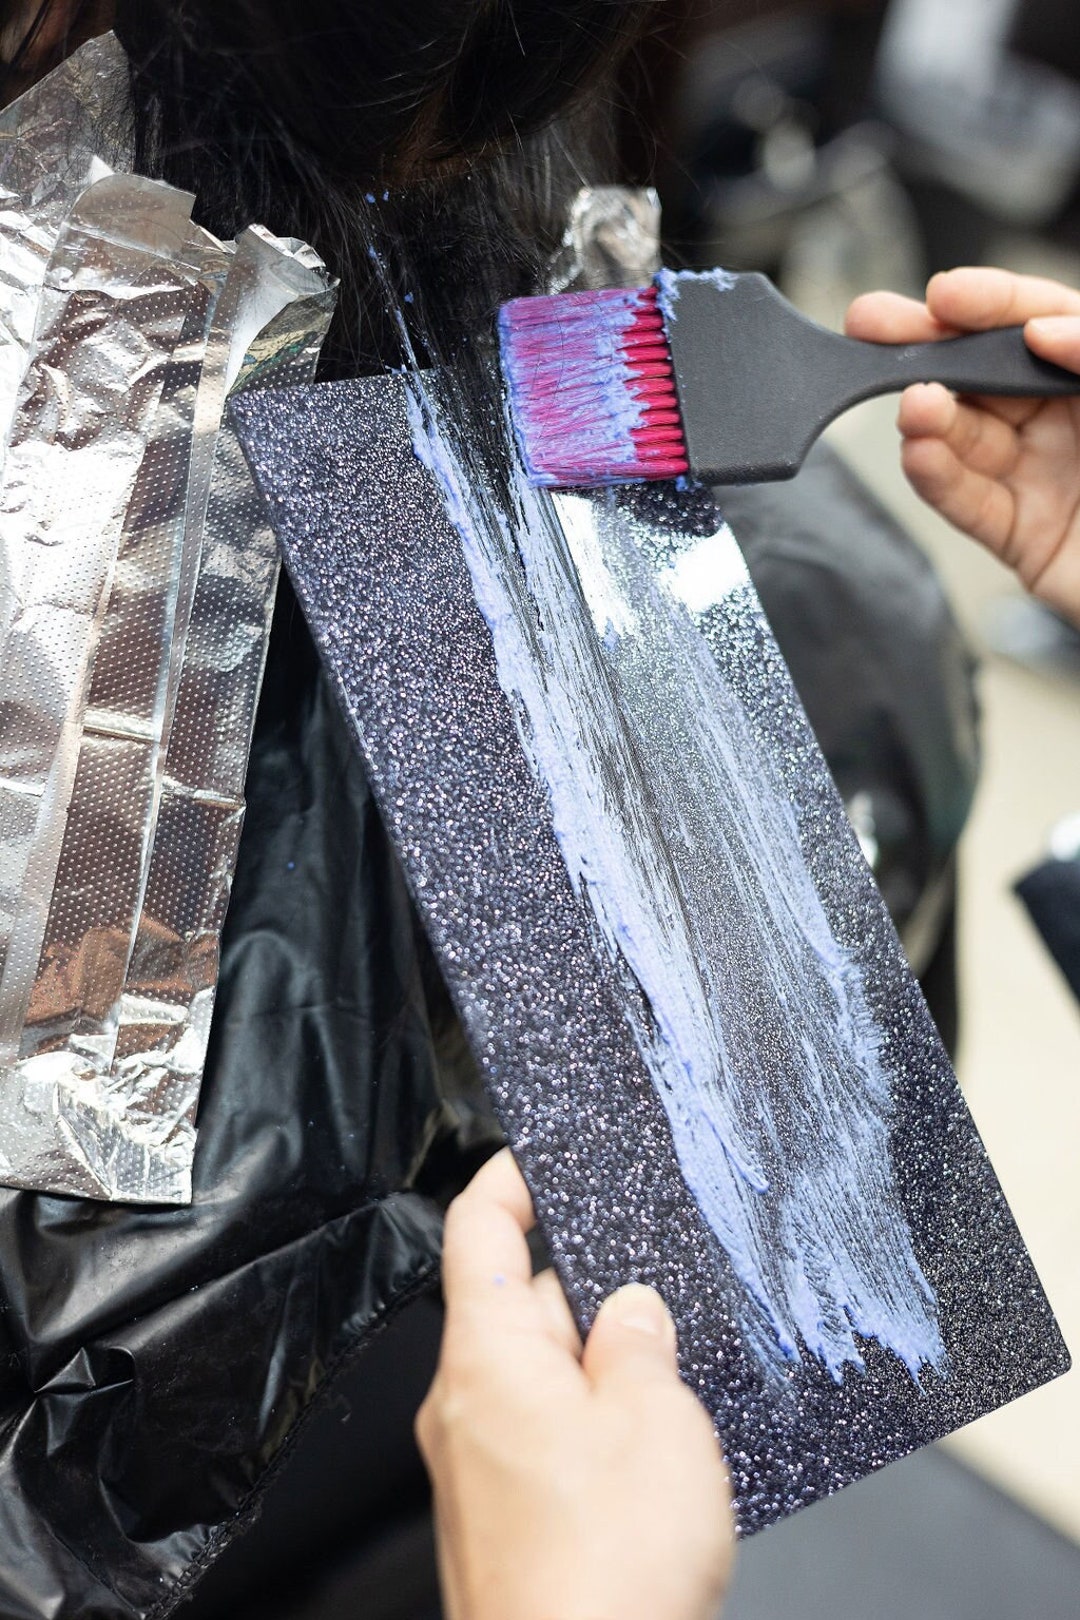 Foils or Balayage: which is right for you? — Hologram Salon